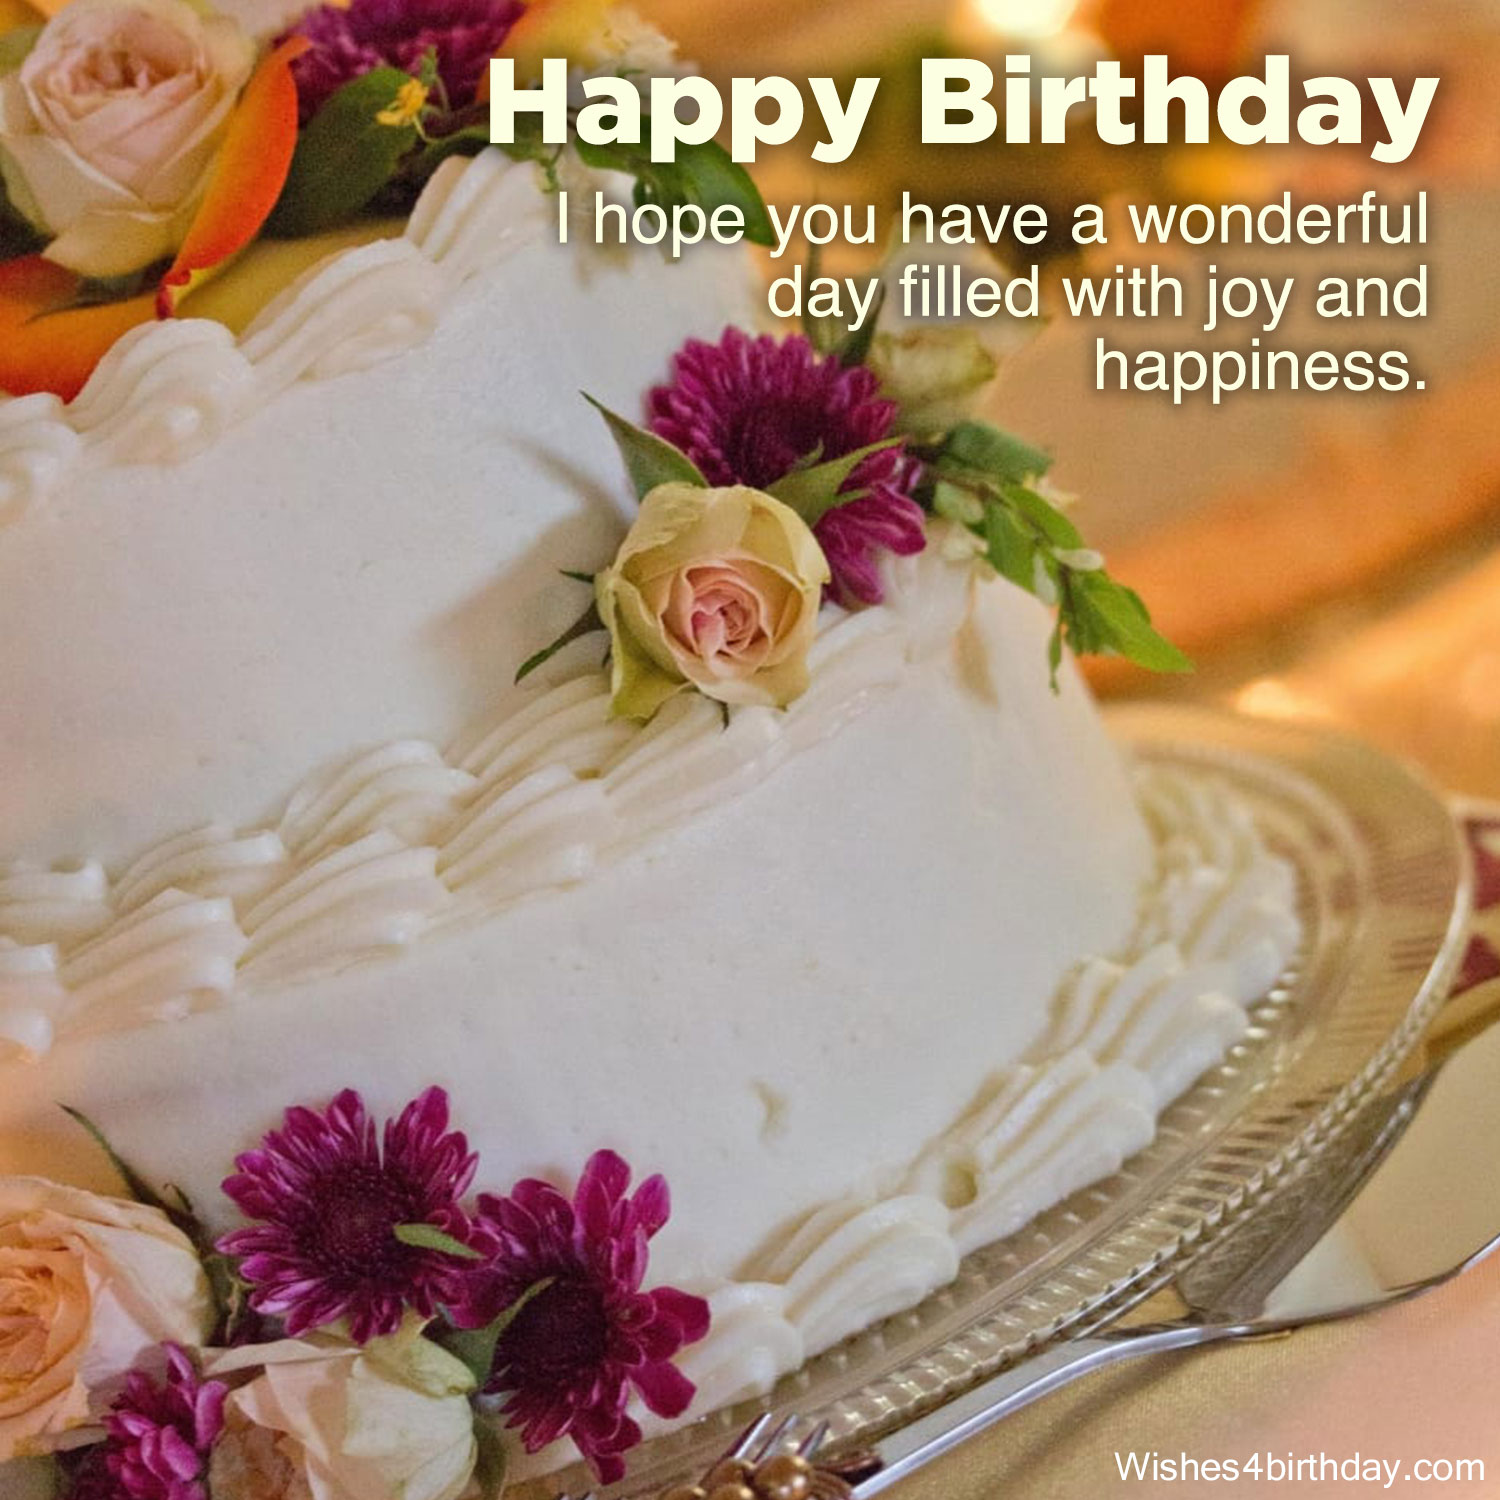 Happy Birthday Cake Images Free Download